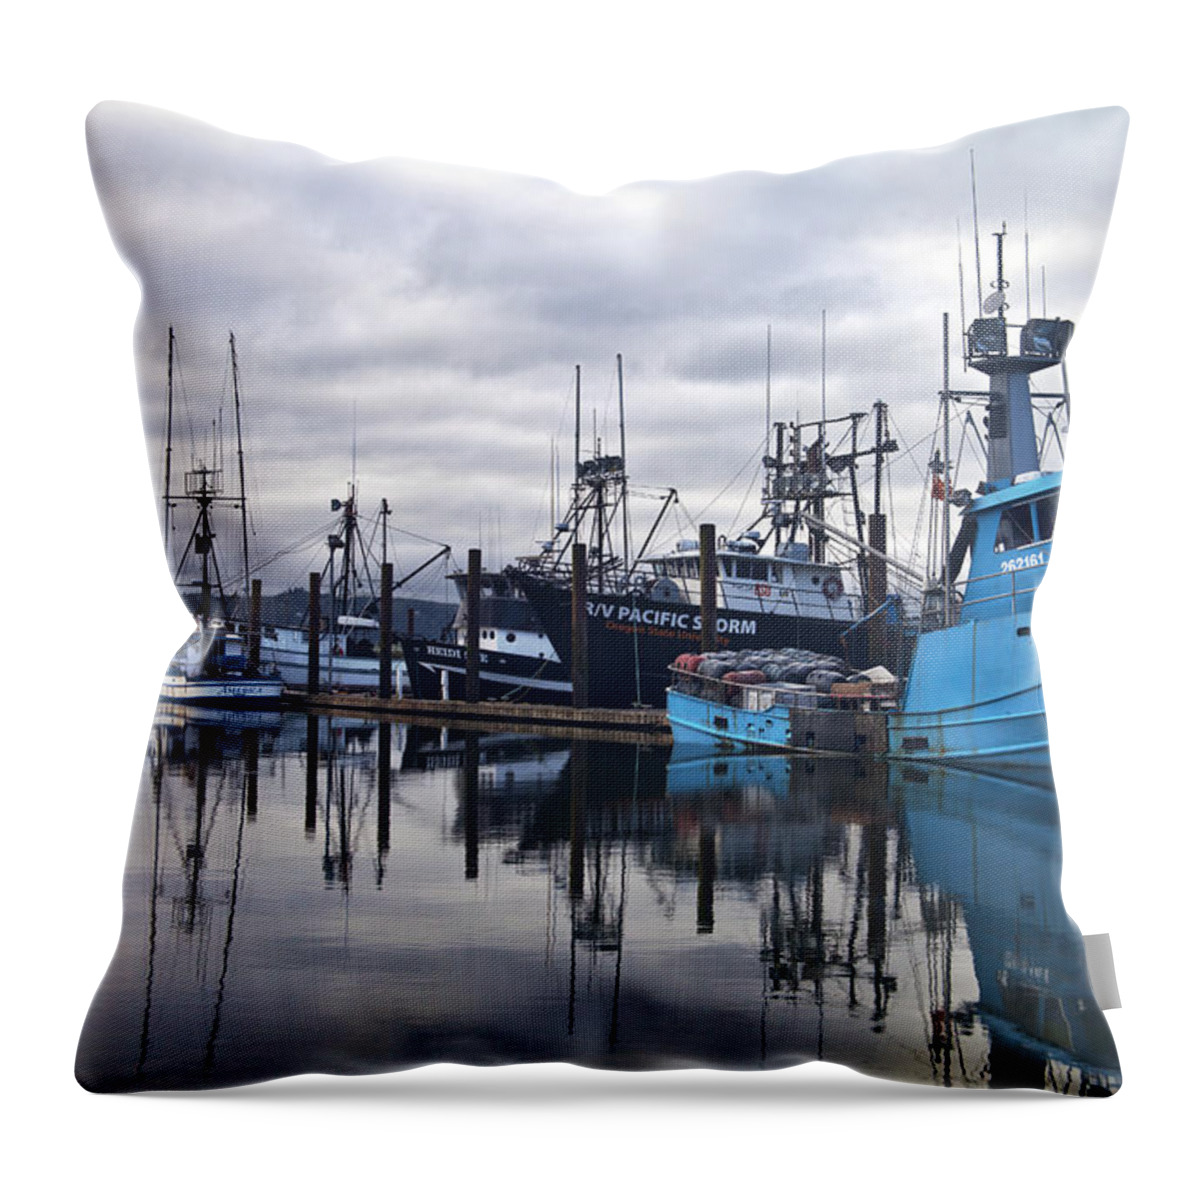 Newport Throw Pillow featuring the photograph Boats in Harbor Newport Oregon by Carol Leigh